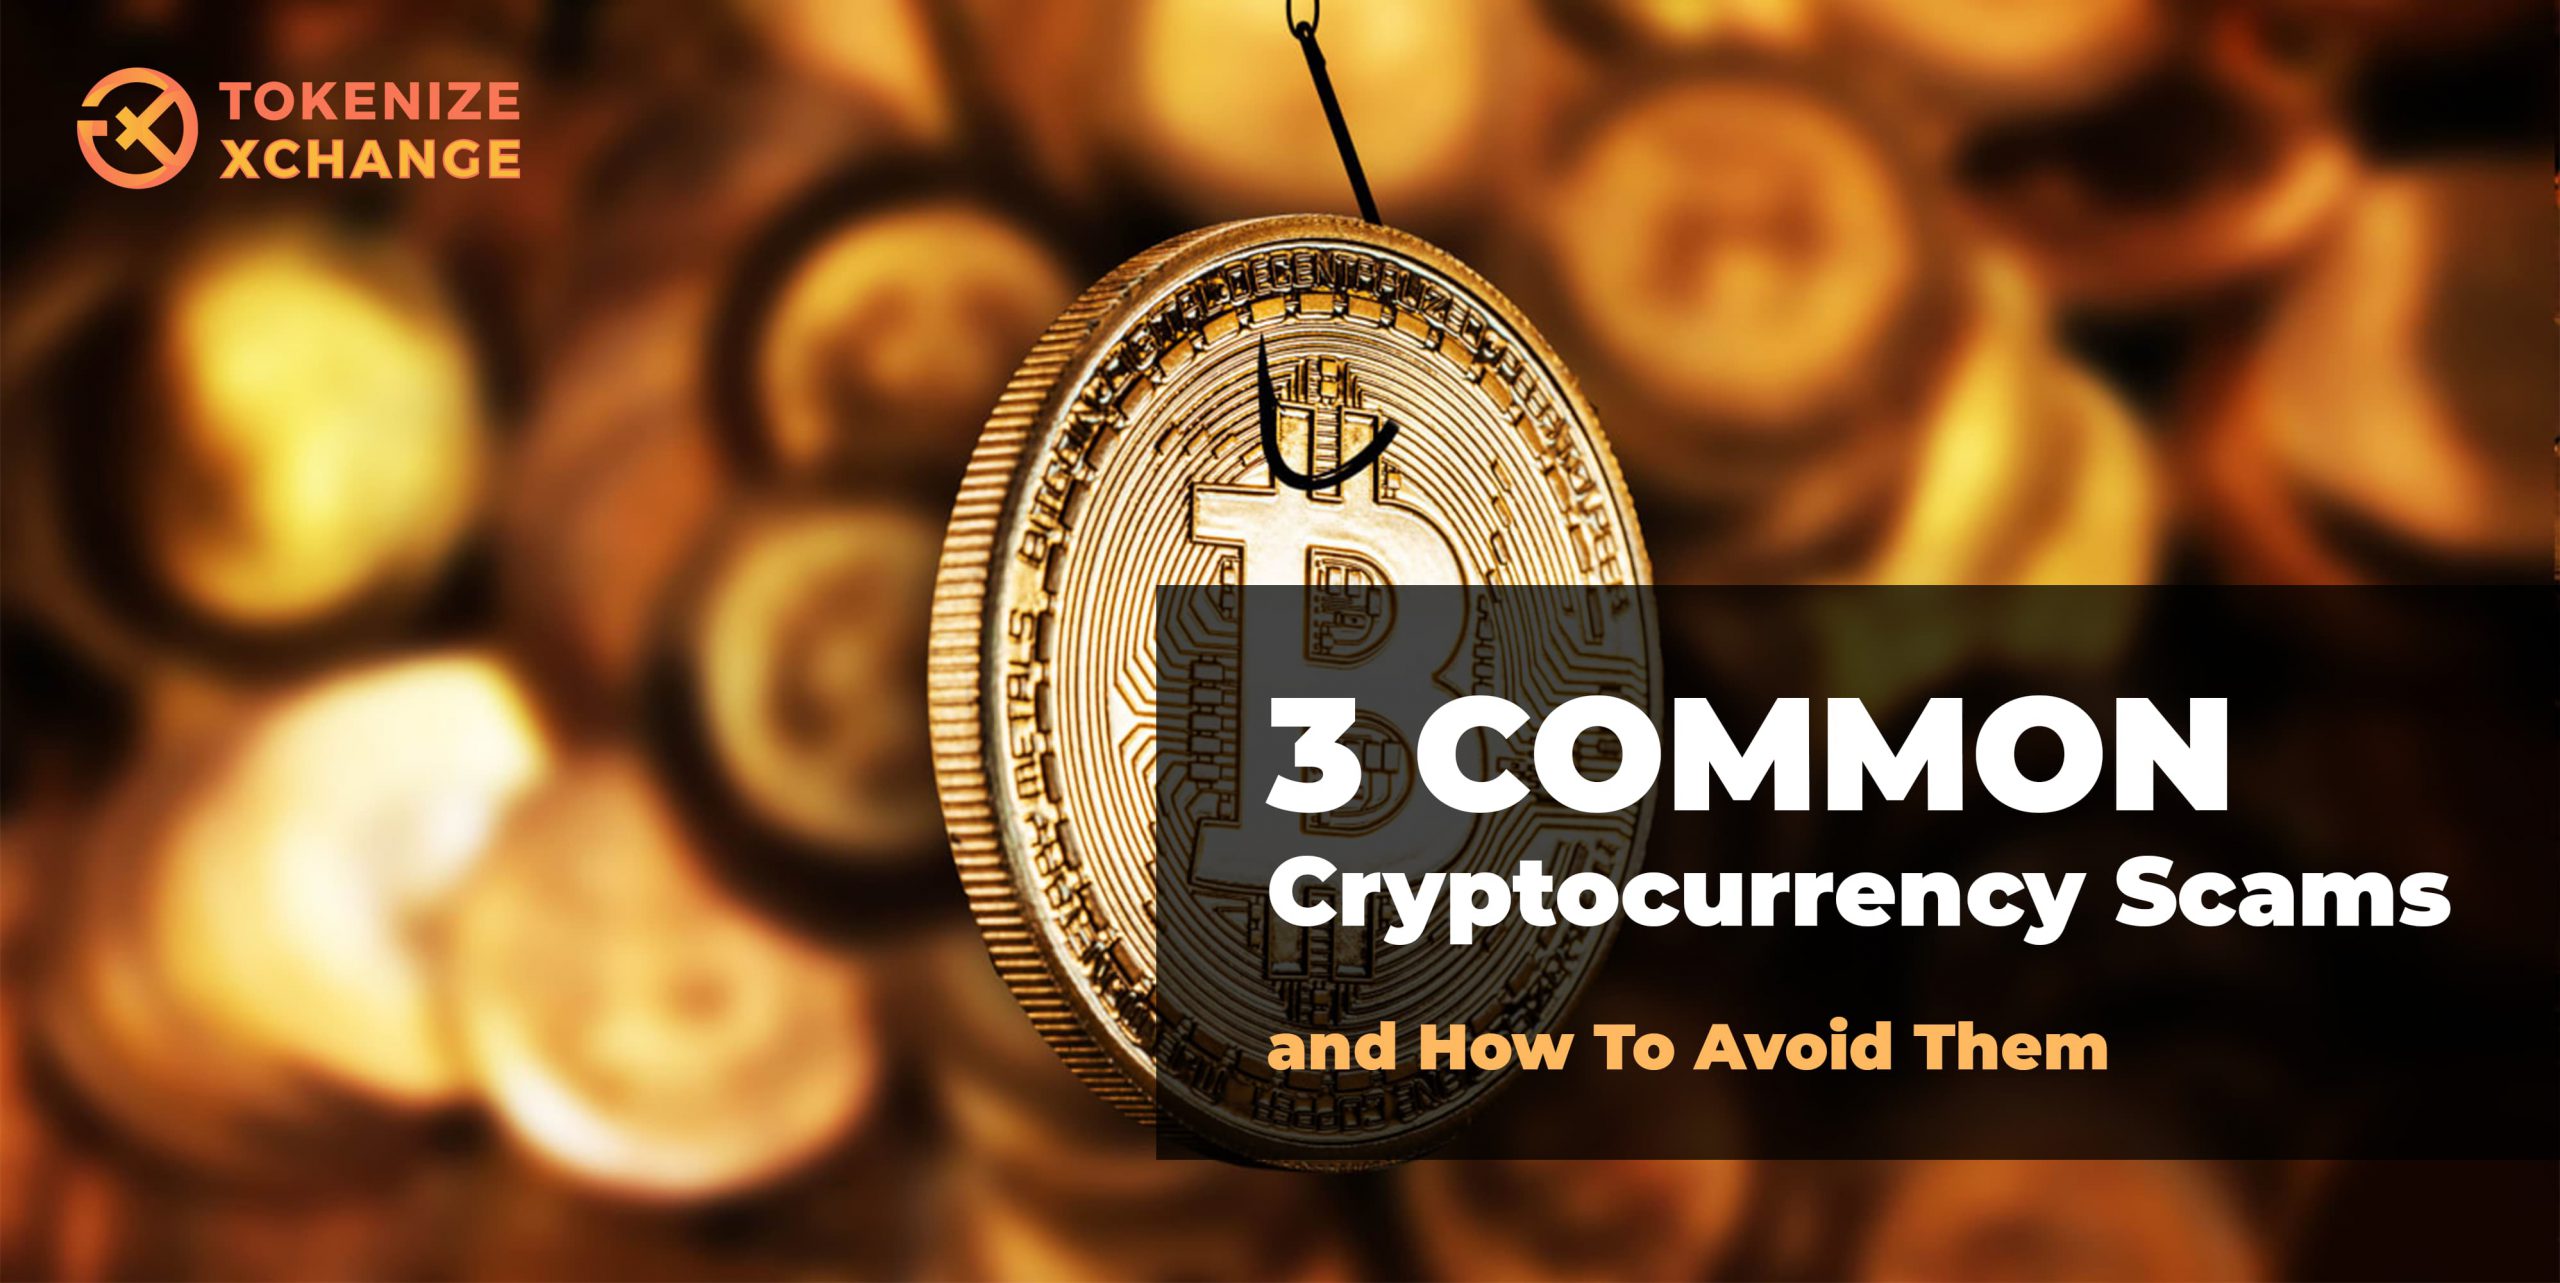 3 common cryptocurrency scams and how to avoid them